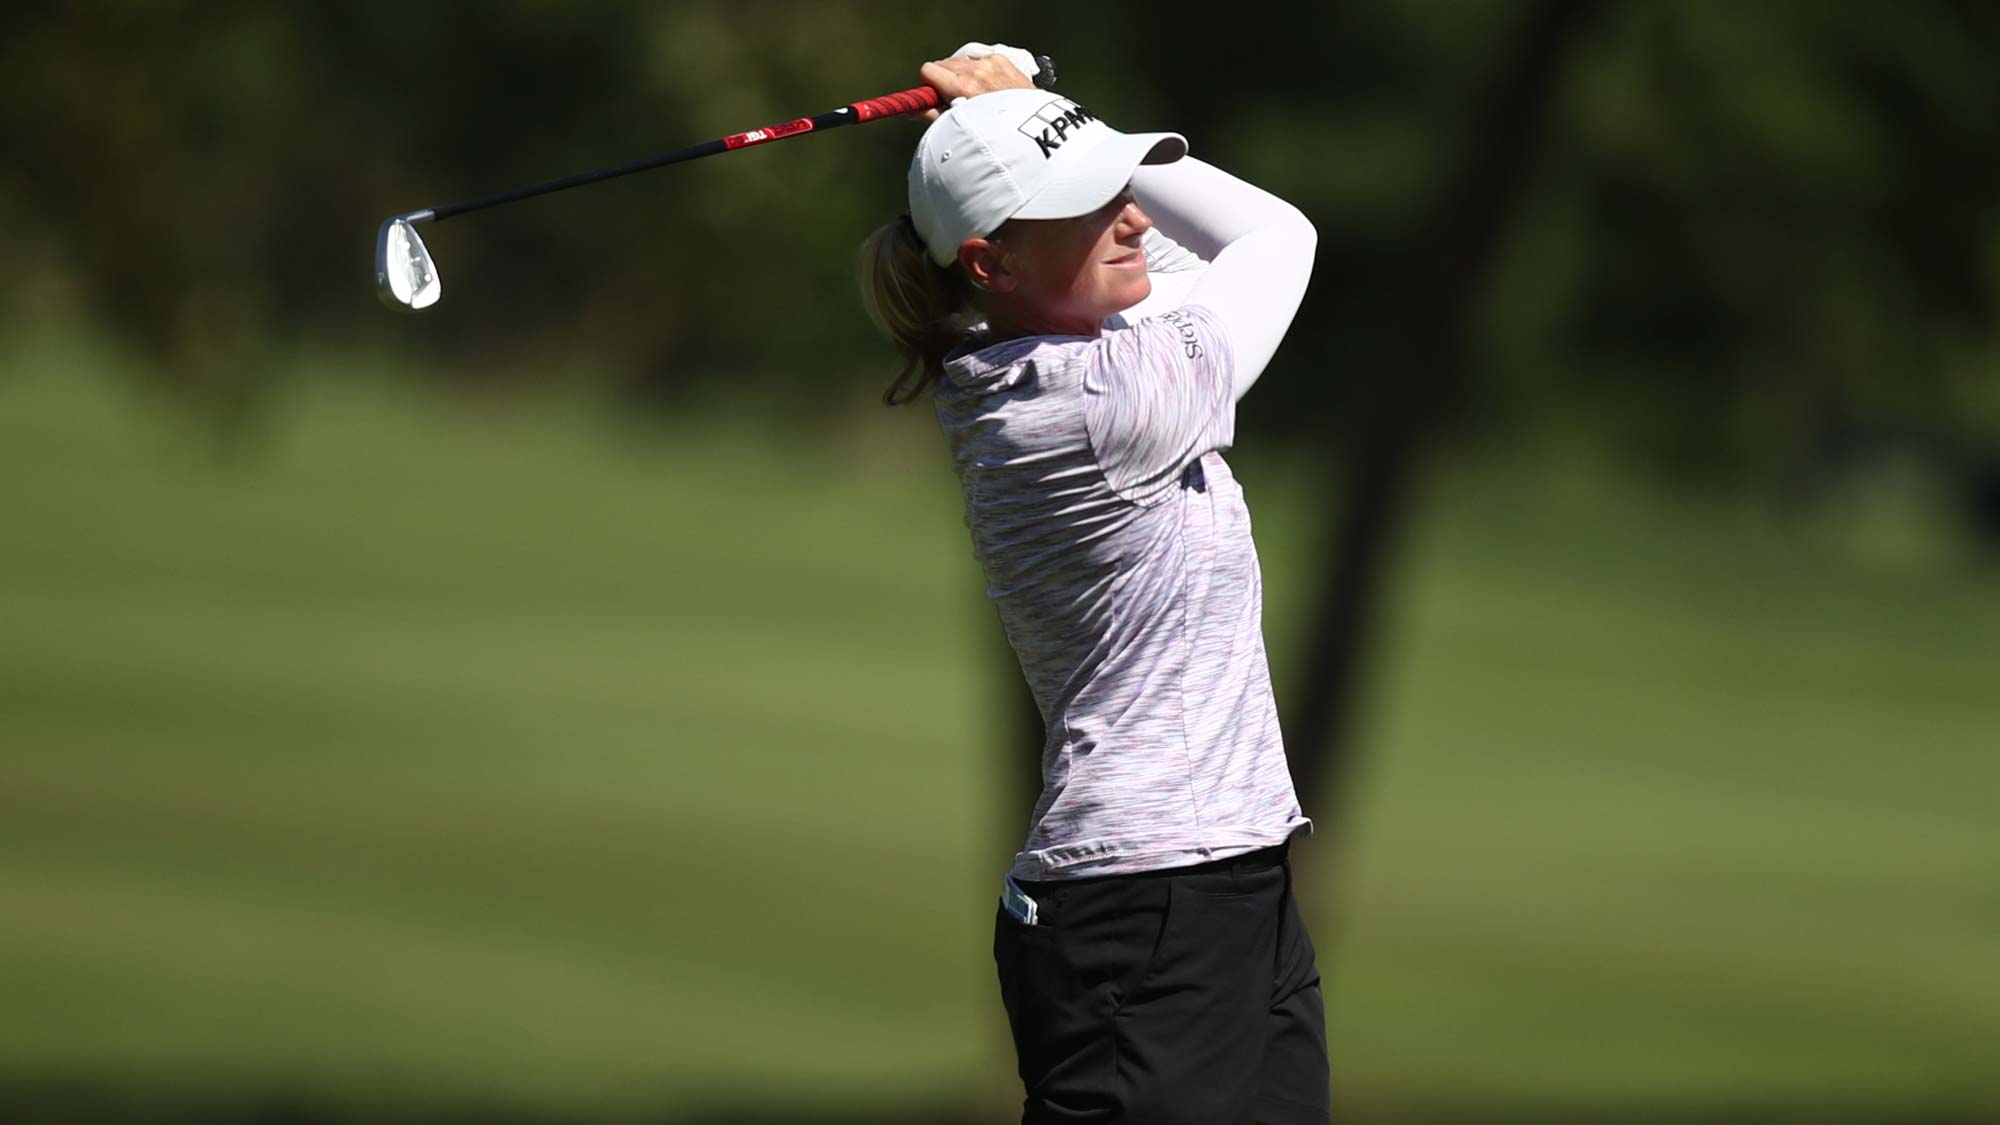 Stacy Lewis plays a shot on the ninth hole during the first round of the LPGA Walmart NW Arkansas Championship 